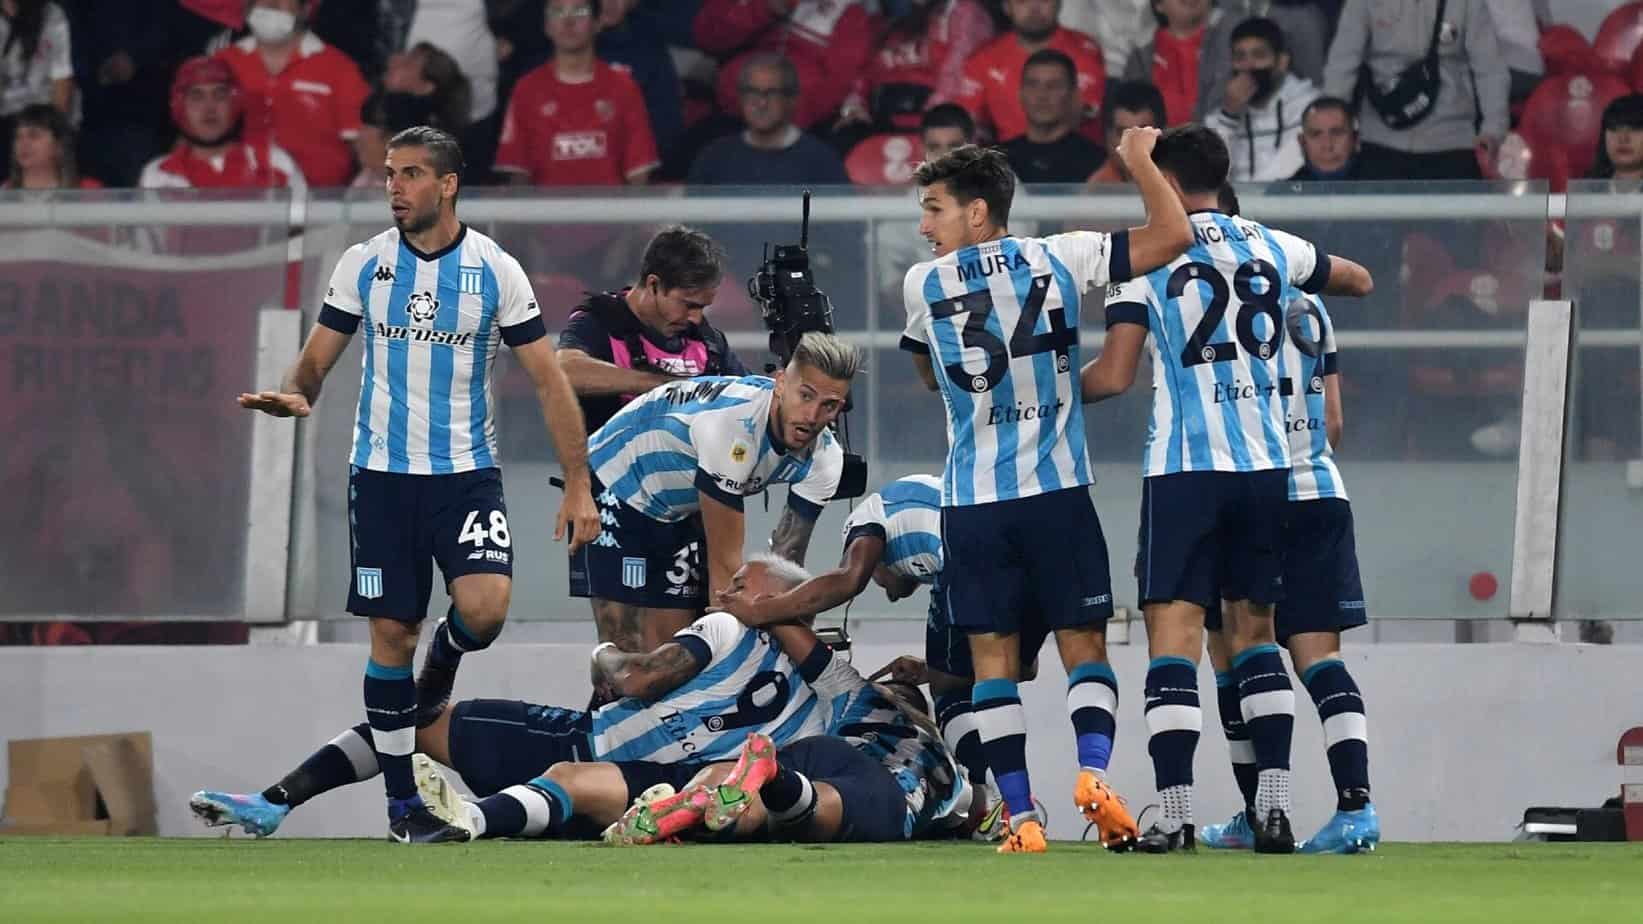 Independiente vs. Racing – Betting Odds and Free Picks